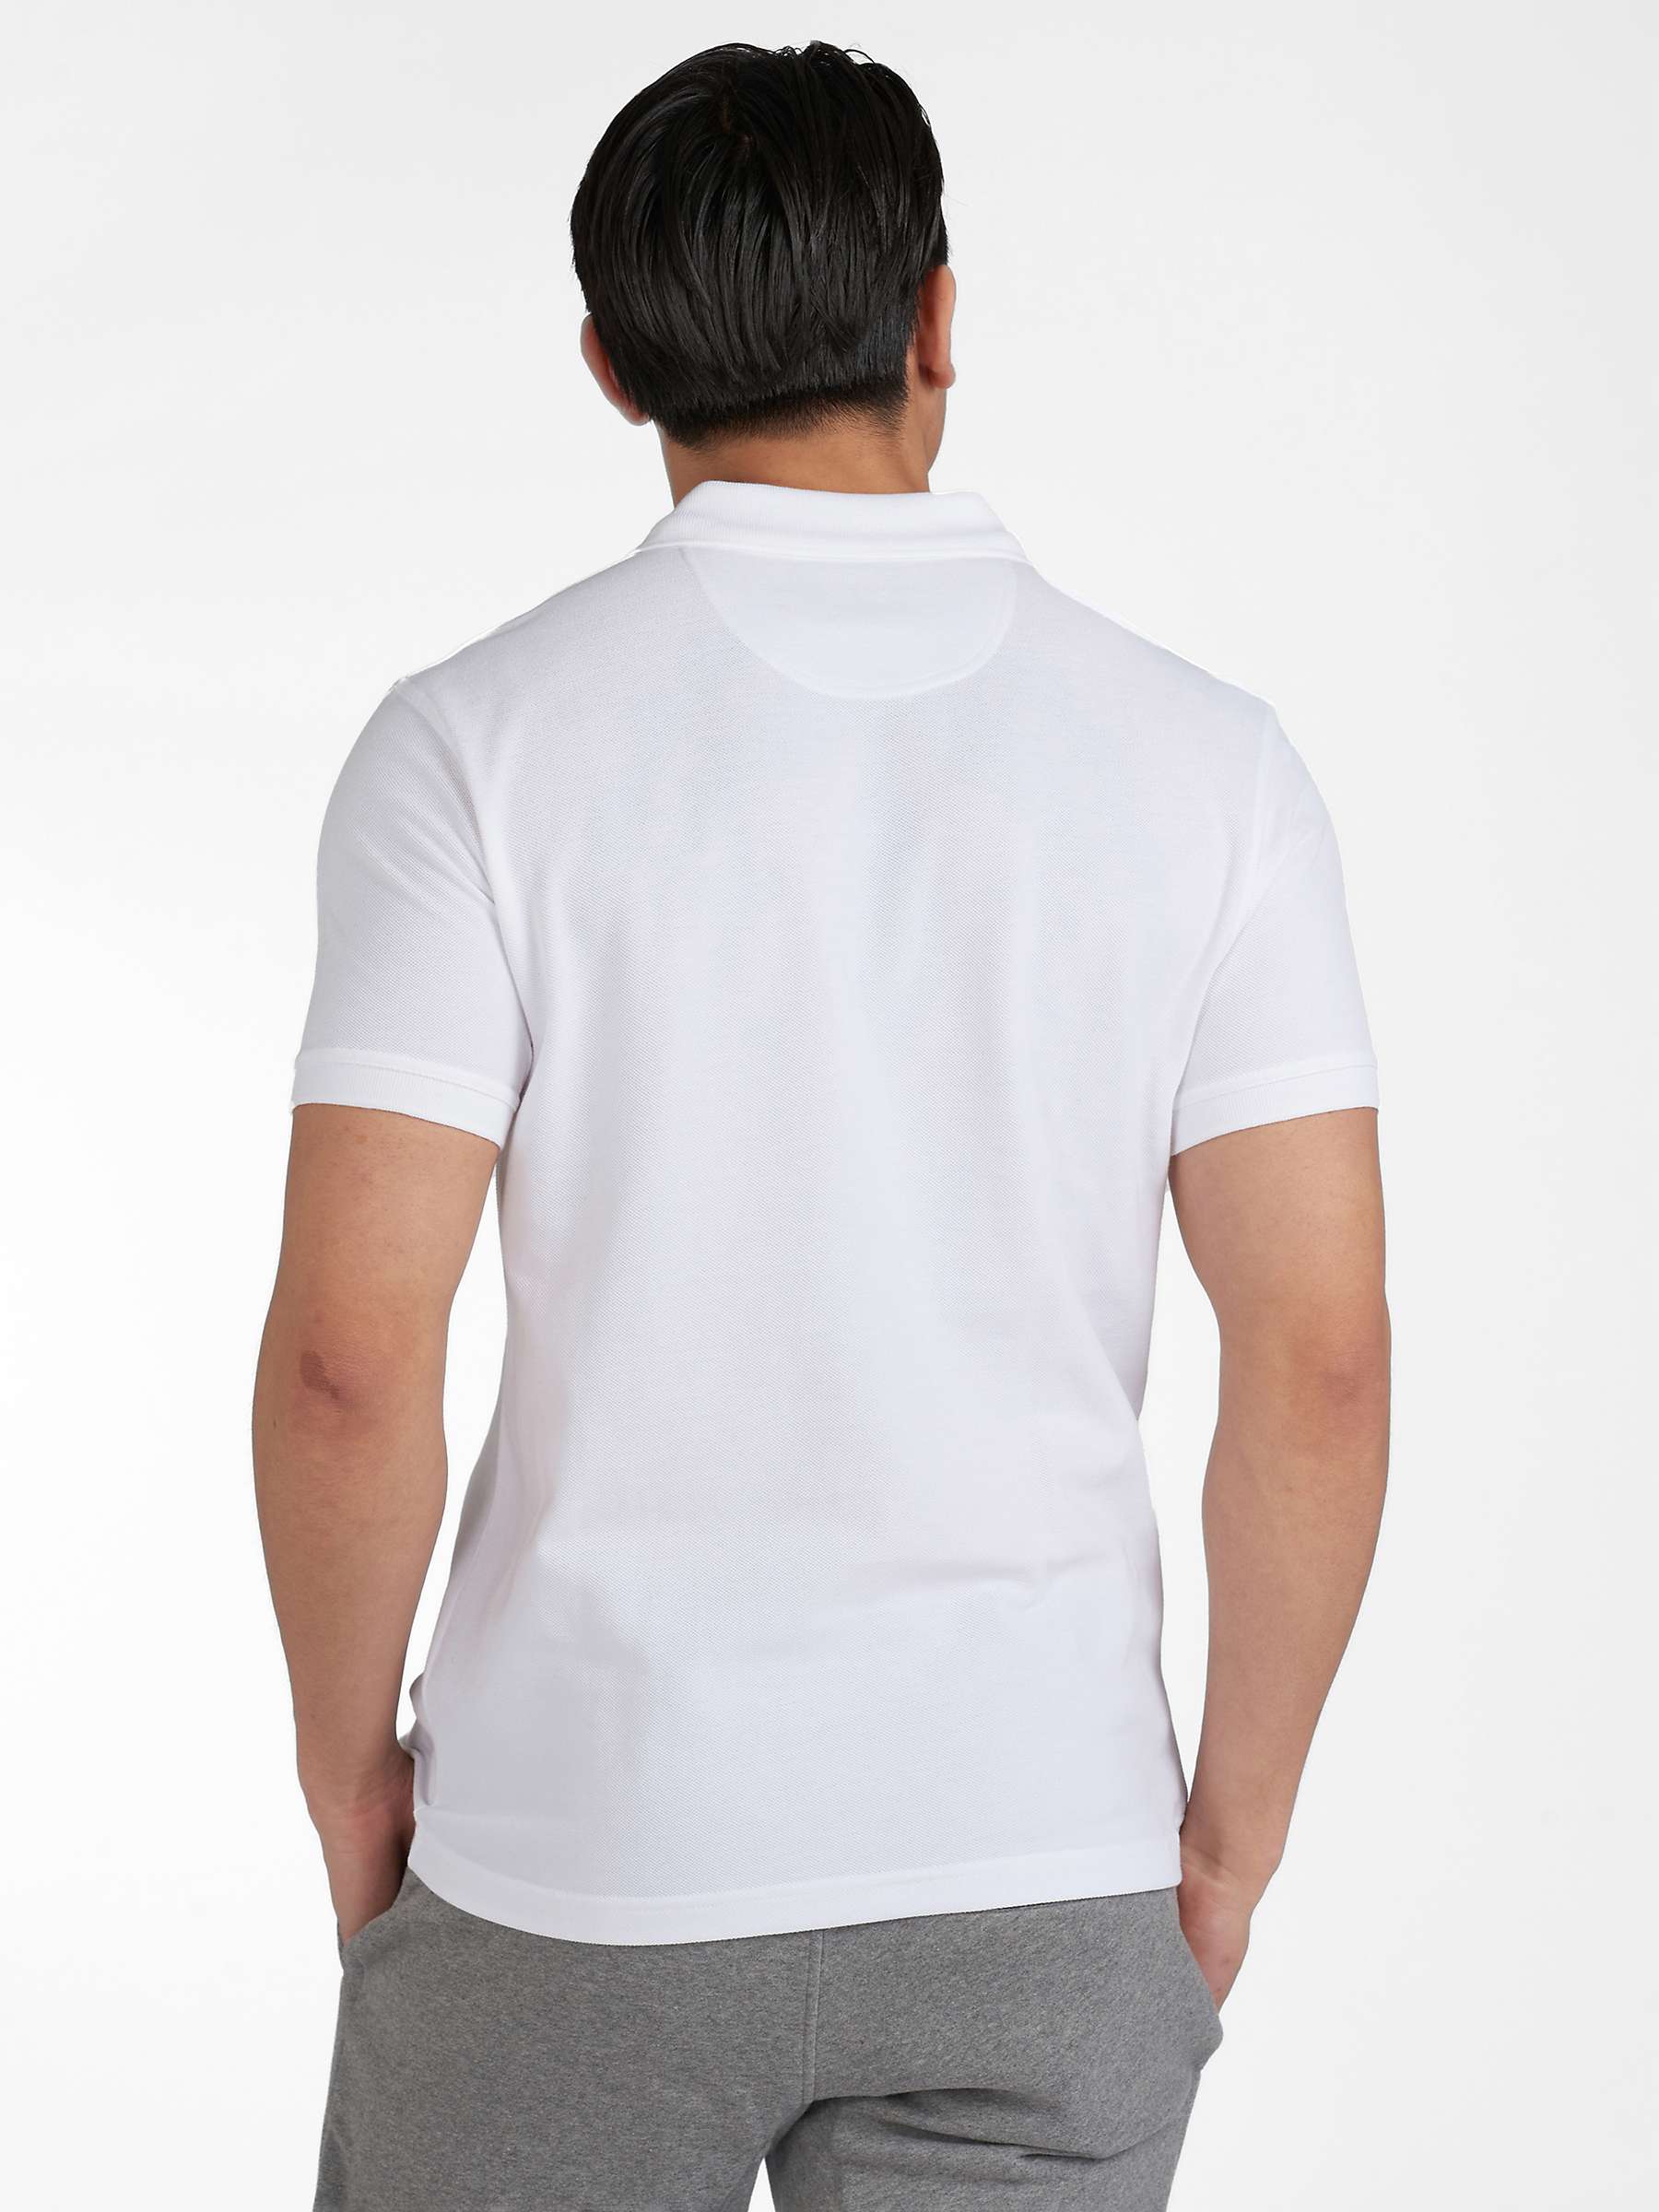 Buy Barbour International Polo Shirt, White Online at johnlewis.com